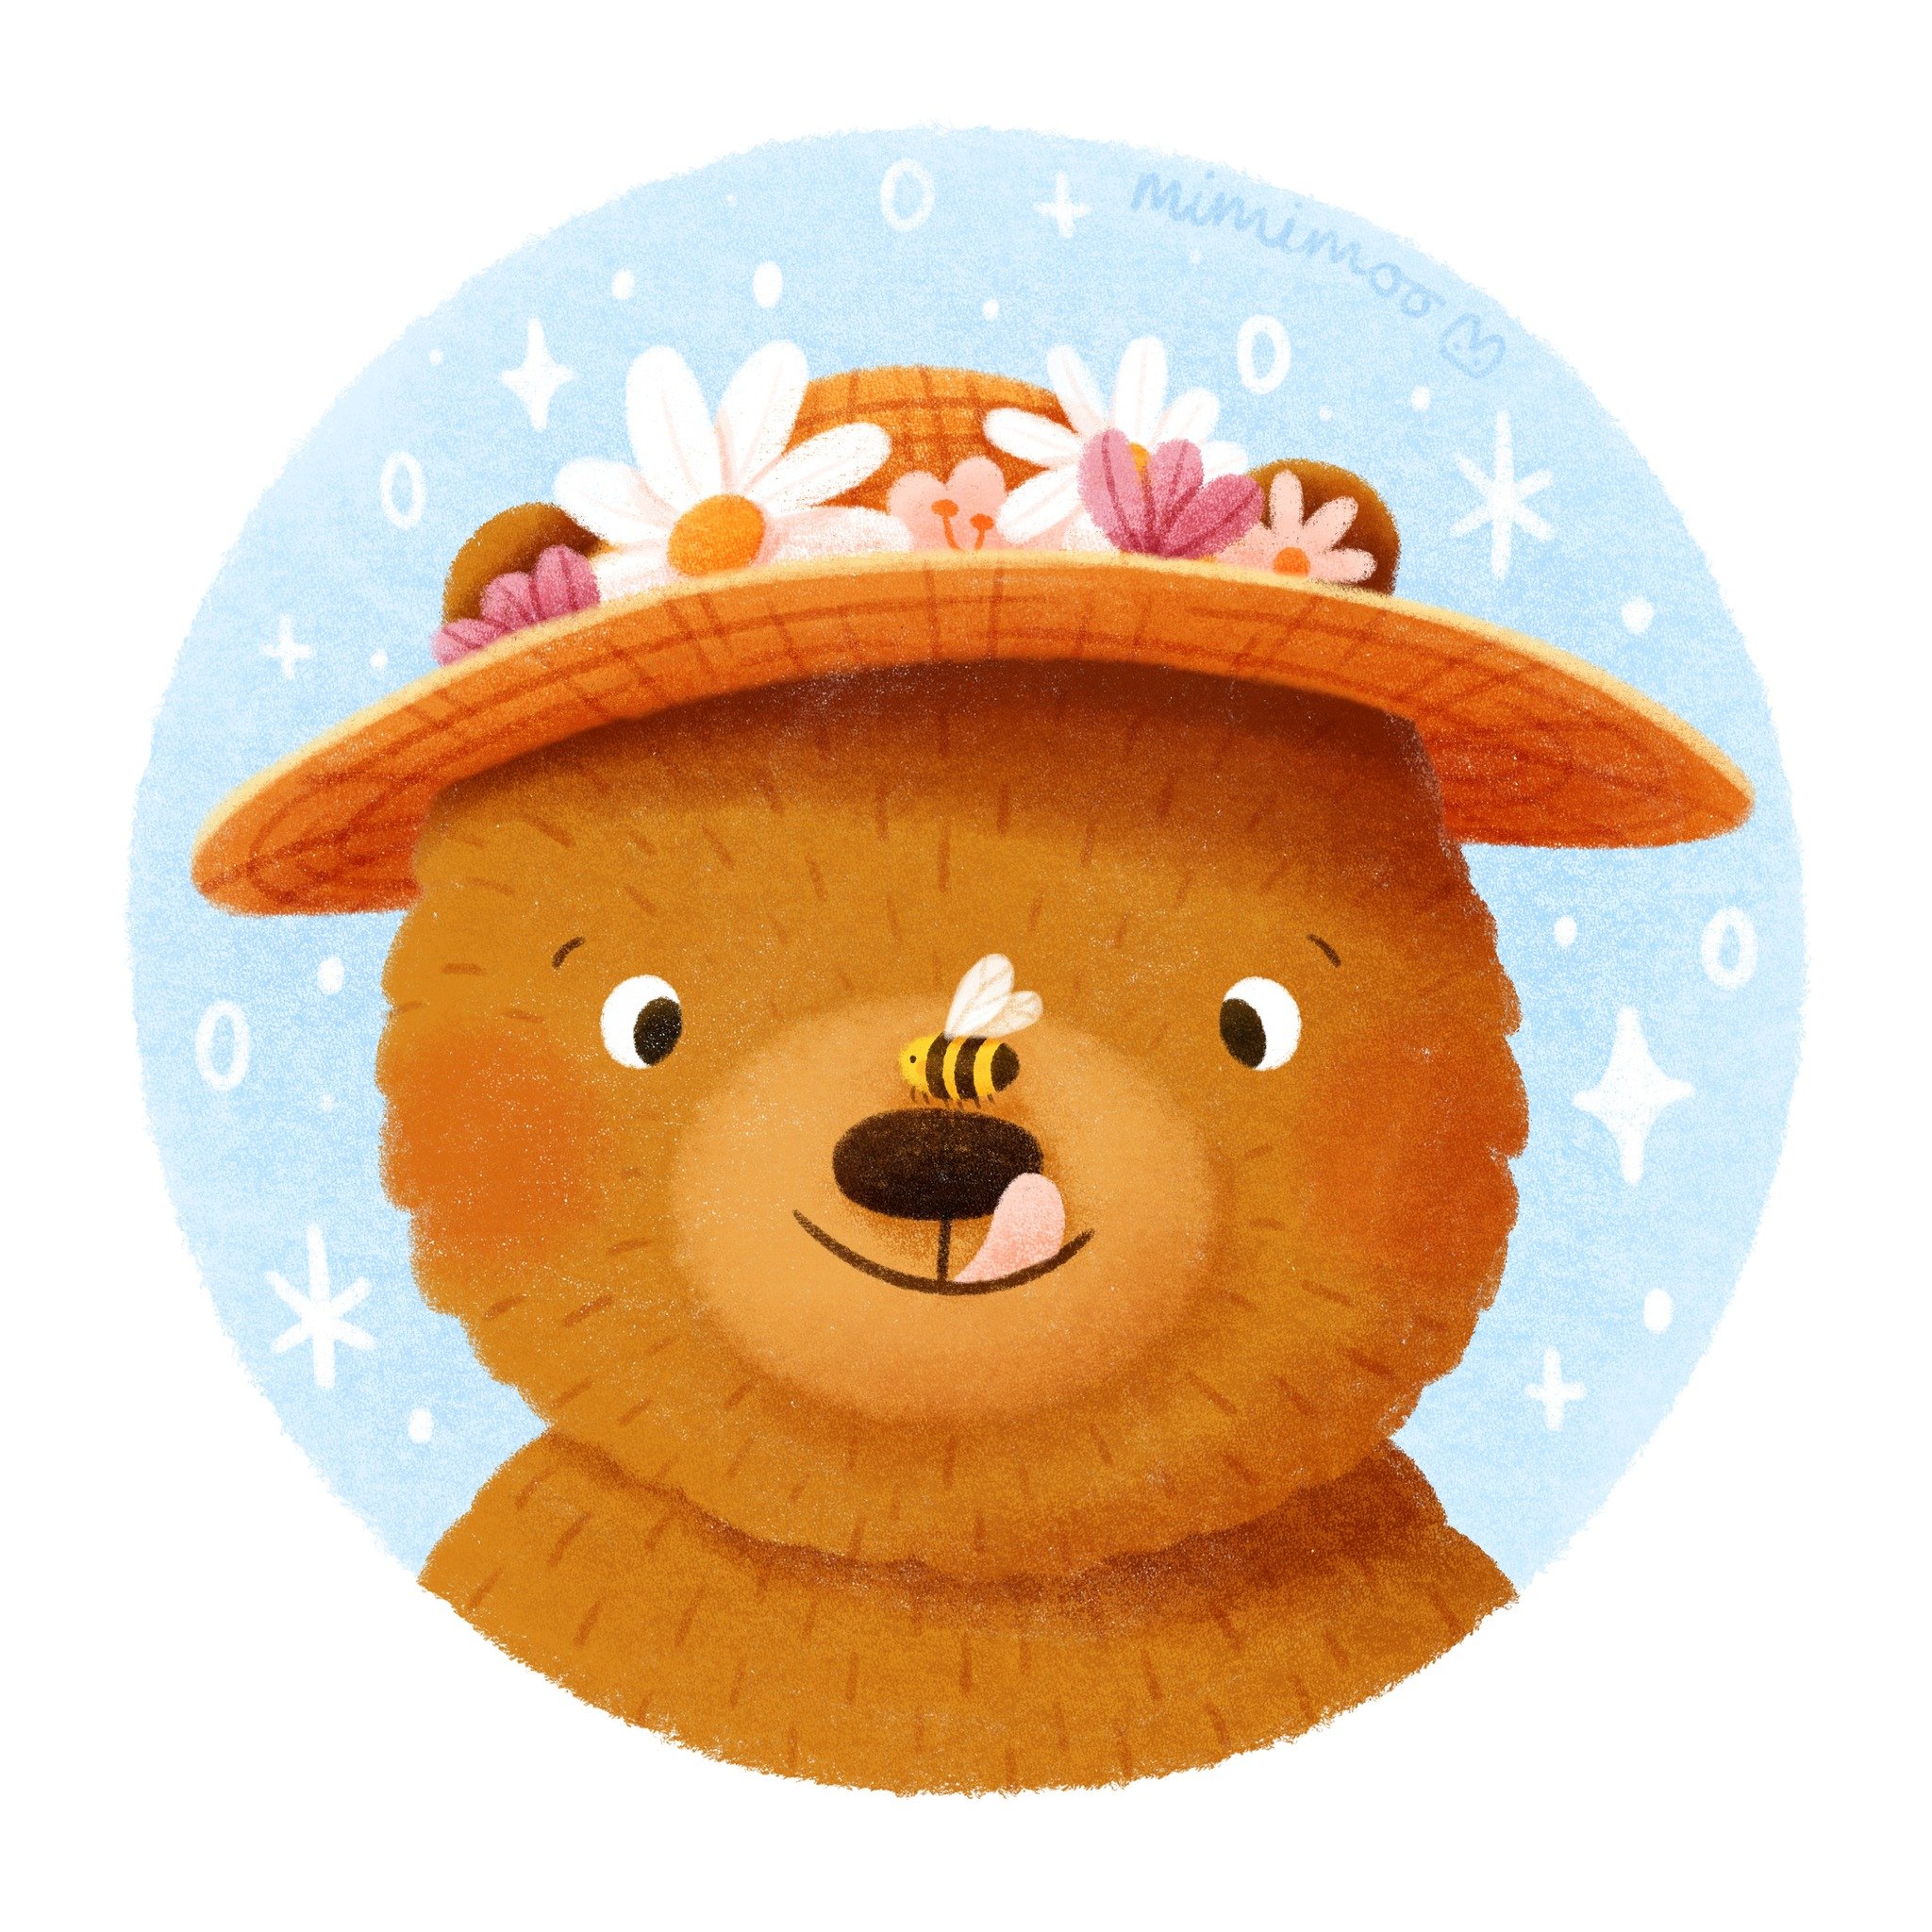 Finally drew another one of my prompts from my 2024 prompt list! This one is 'bear in a sunhat' 🐻🐝💖

Brushes I used (from my brush packs):
🌷 Mimi Simple Sketching for initial sketch
🌷 Mimi Big Fuzzy Brush and Textured Pencil for colouring shapes